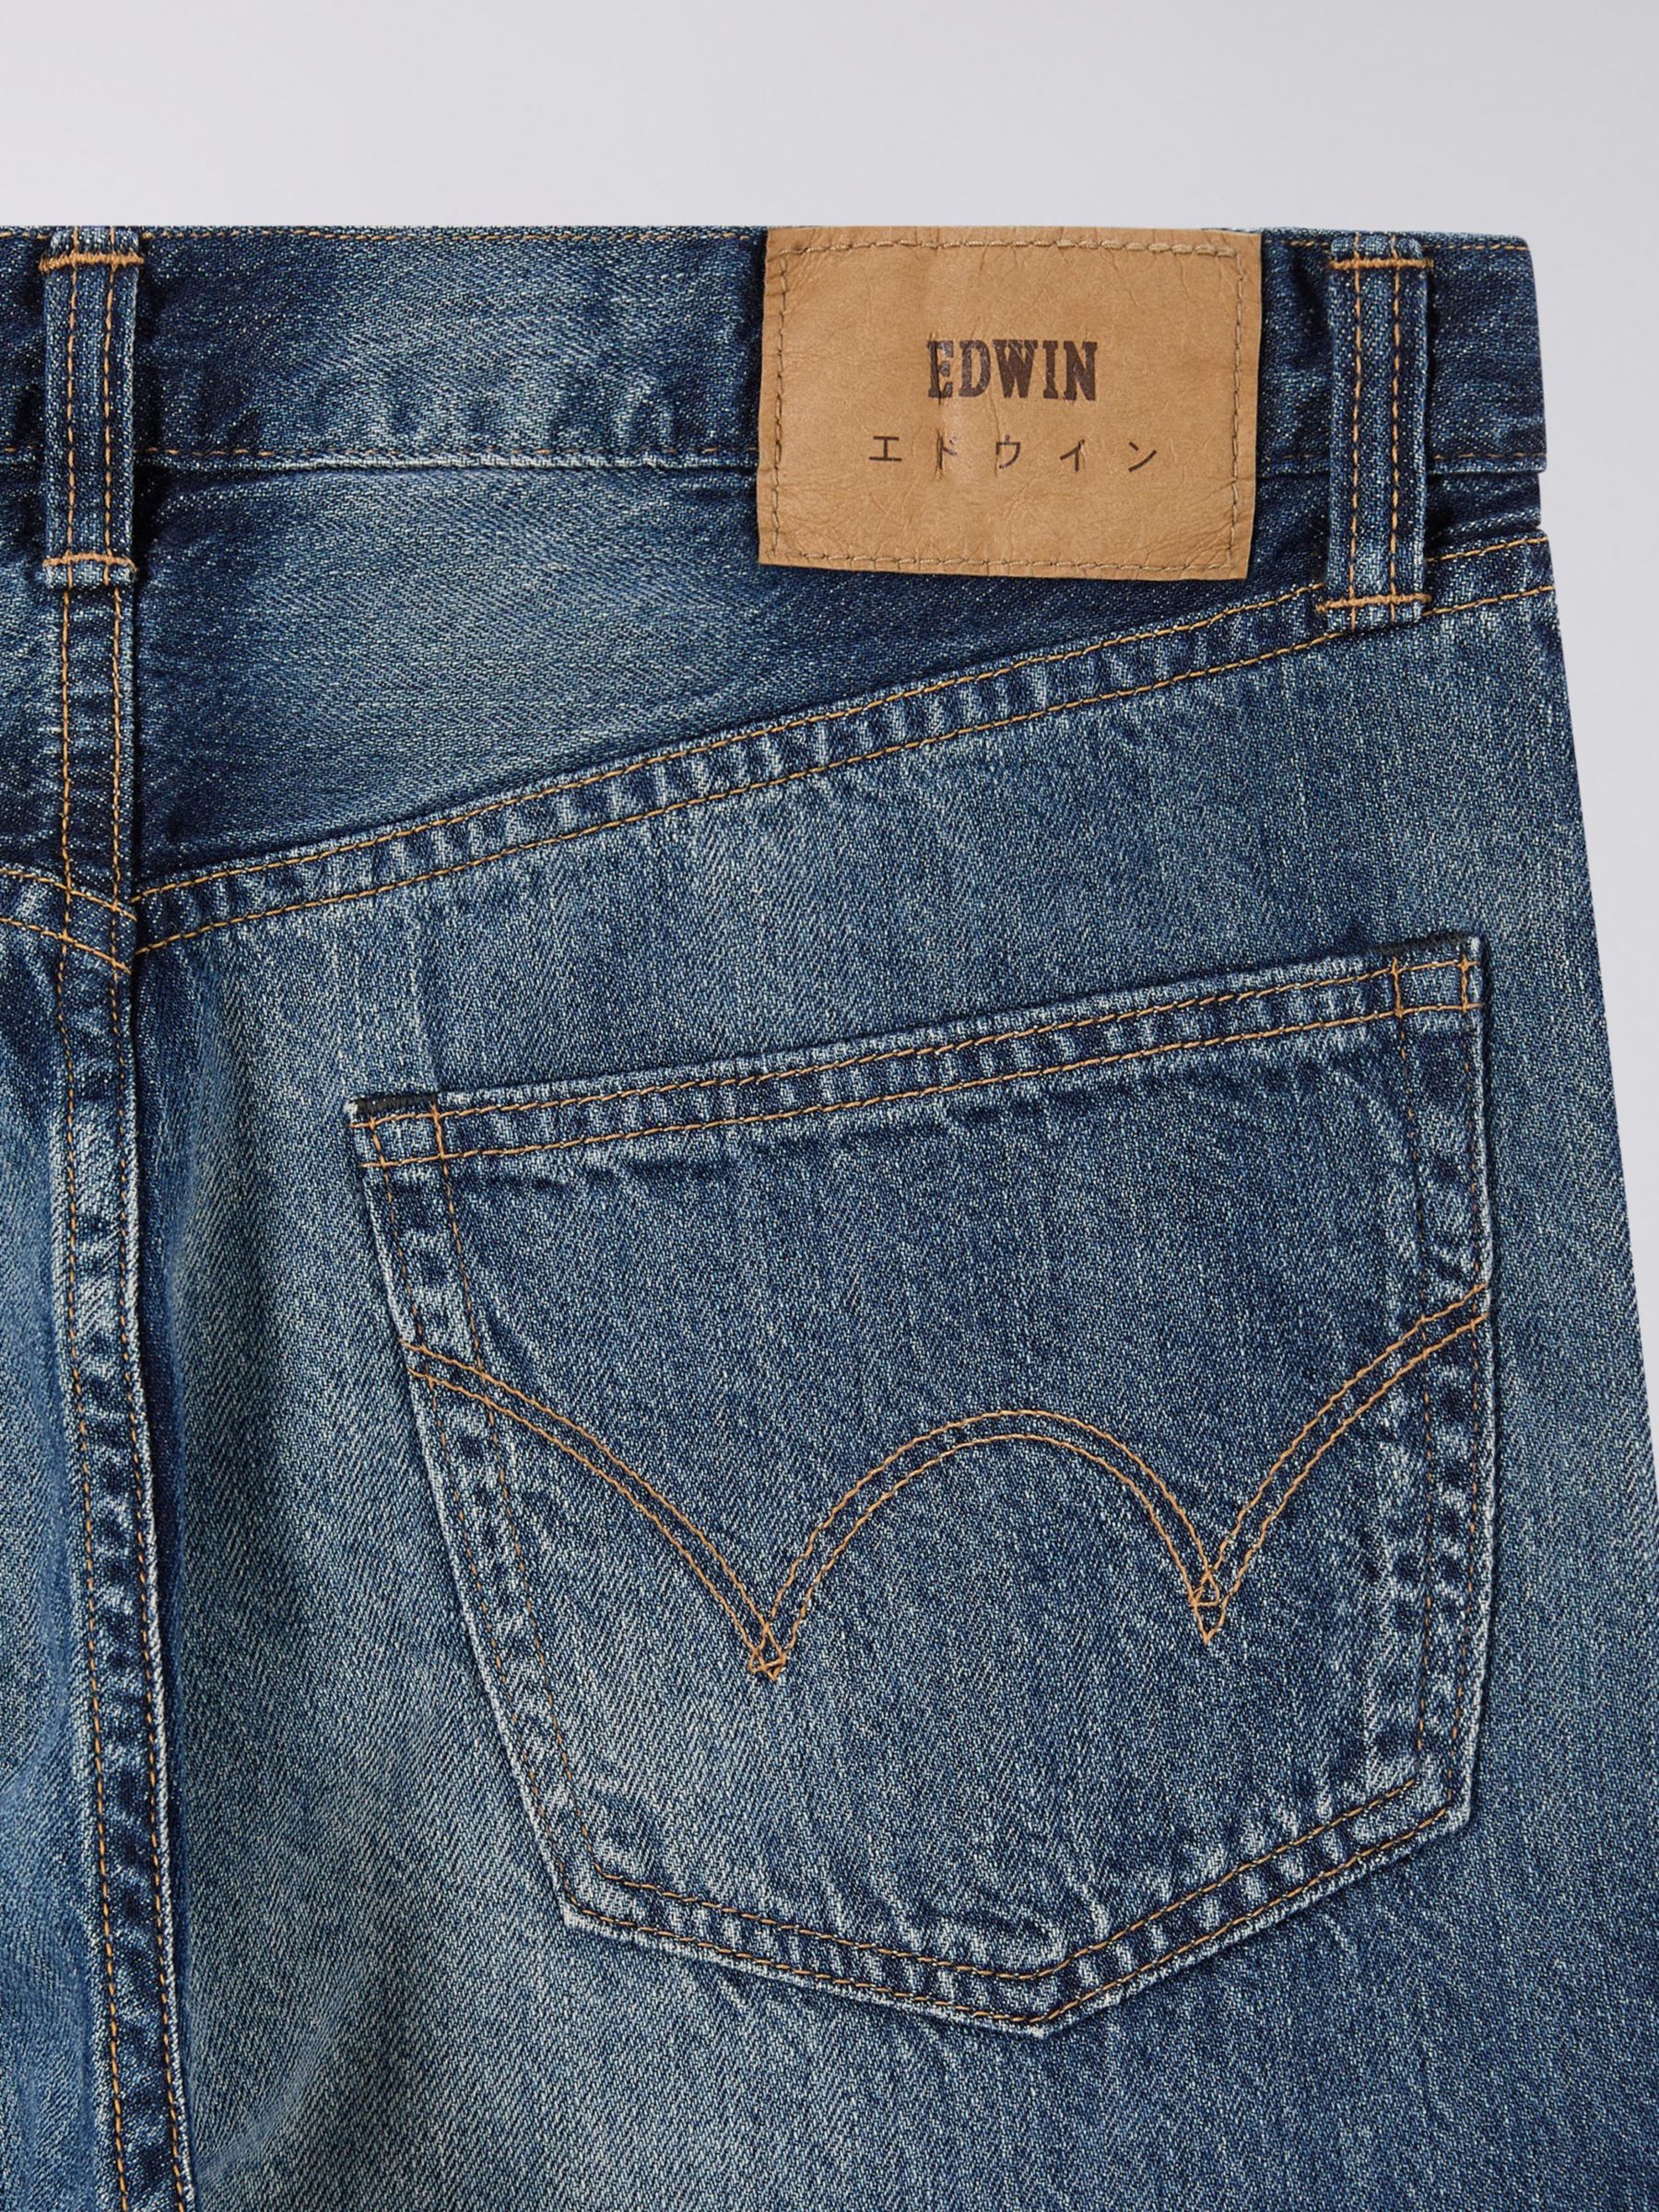 Edwin Kaihara Tapered Jeans, Blue, 32R